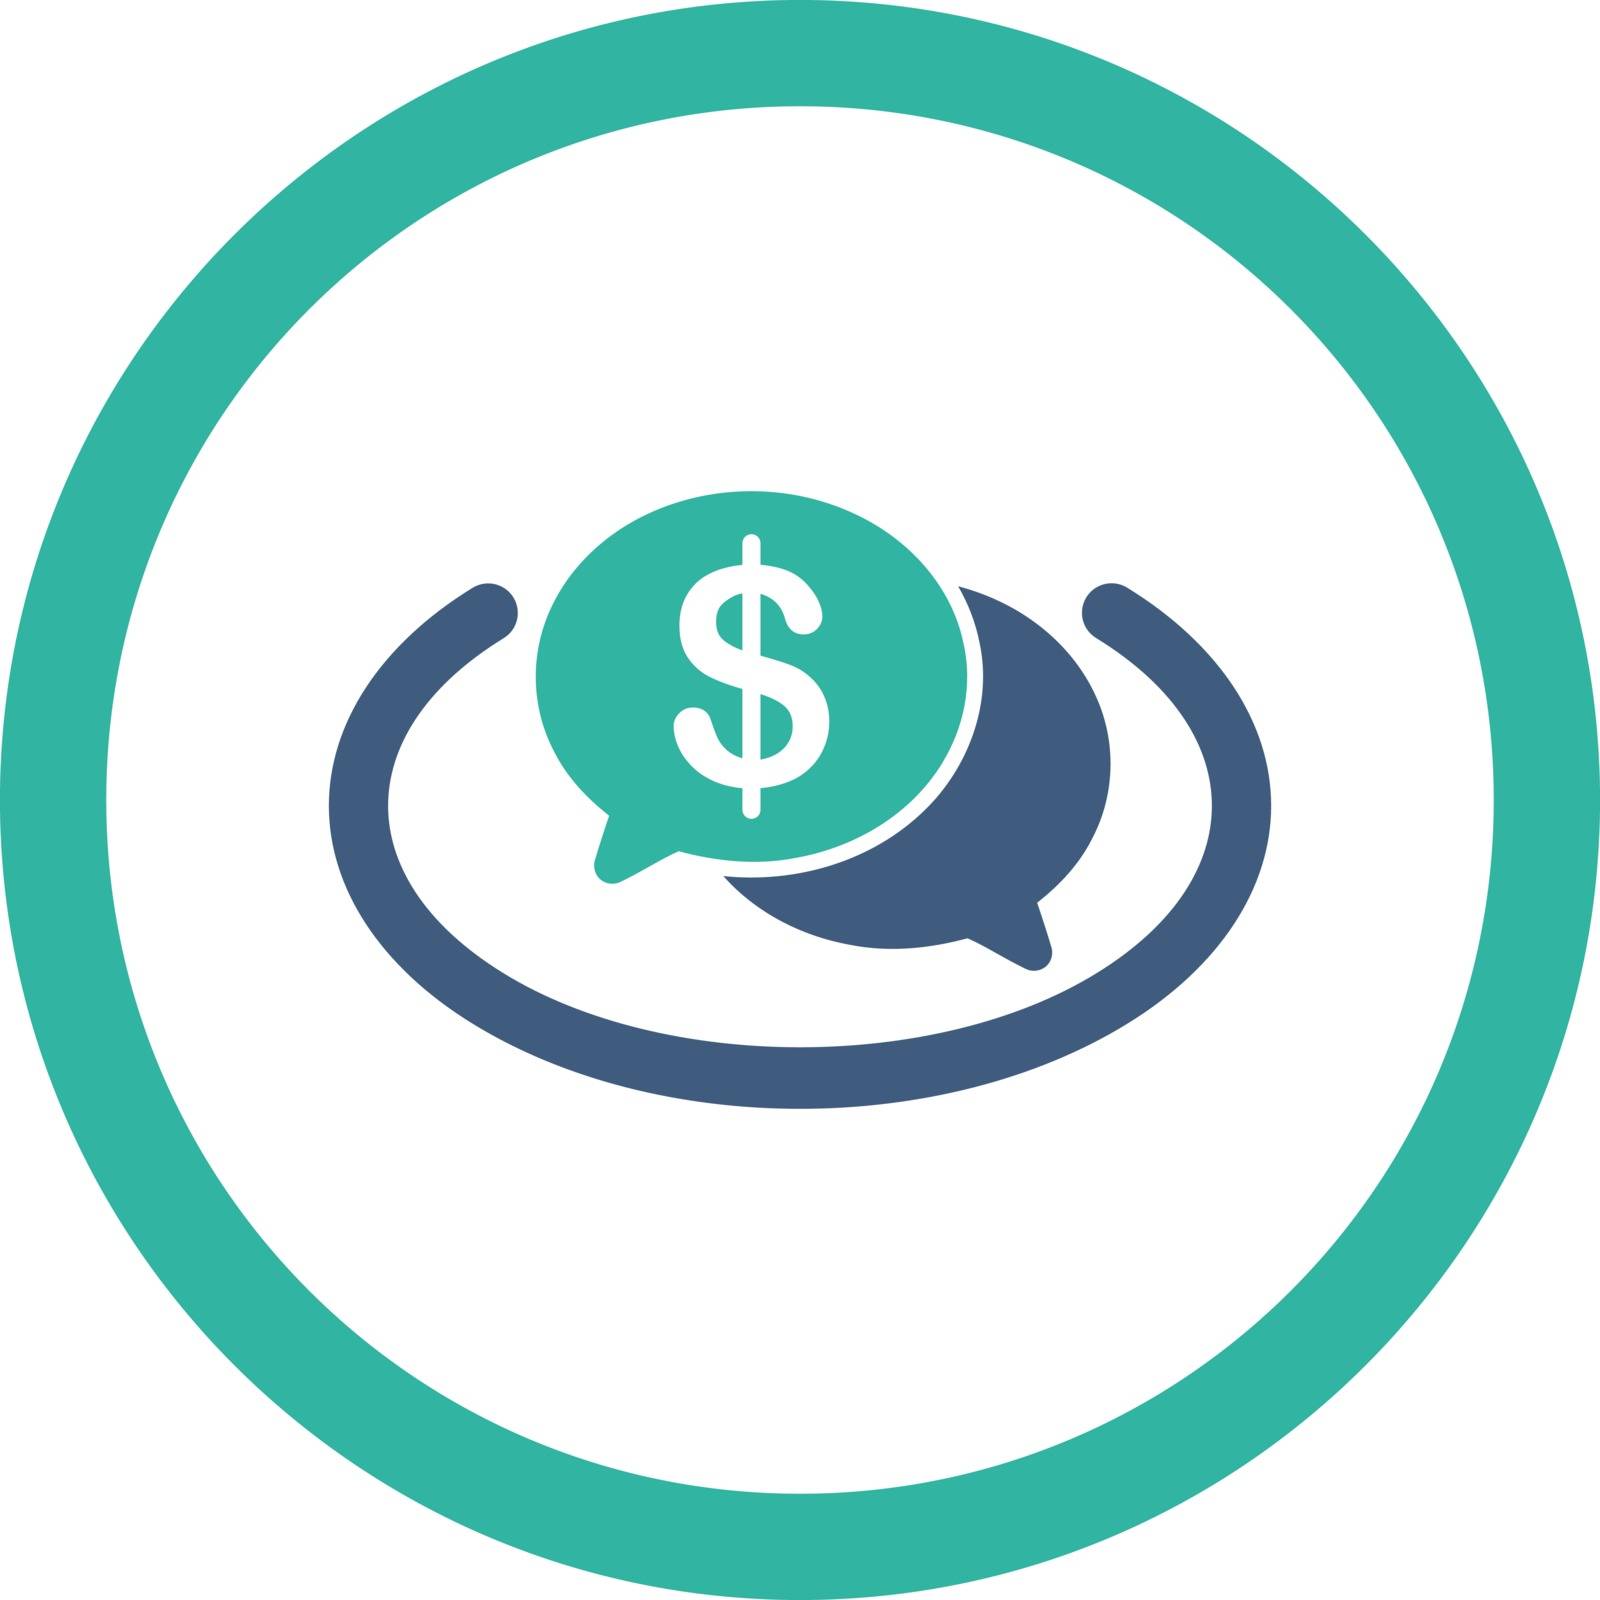 Financial Network vector icon. This flat rounded symbol uses cobalt and cyan colors and isolated on a white background.